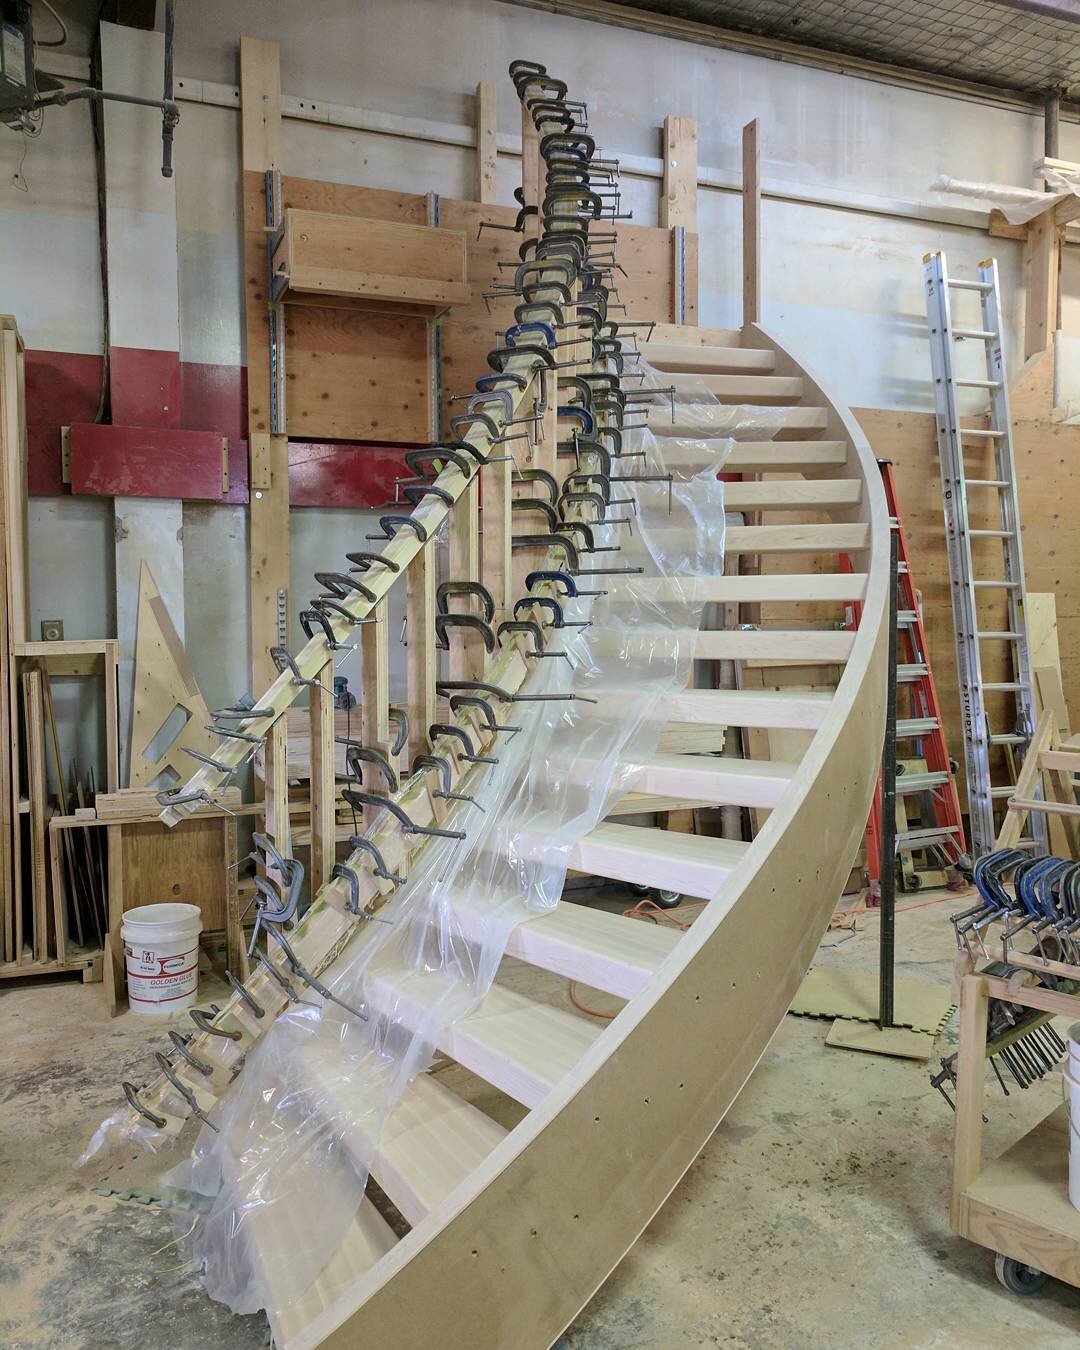 Lots of bending on this curved stair! This one has a custom curved half wall attached to the inside of the curve. Super fun to build curves again! #bpbanister #stairs #railings #yxe #curvedstairs #customwoodwork #customstairs